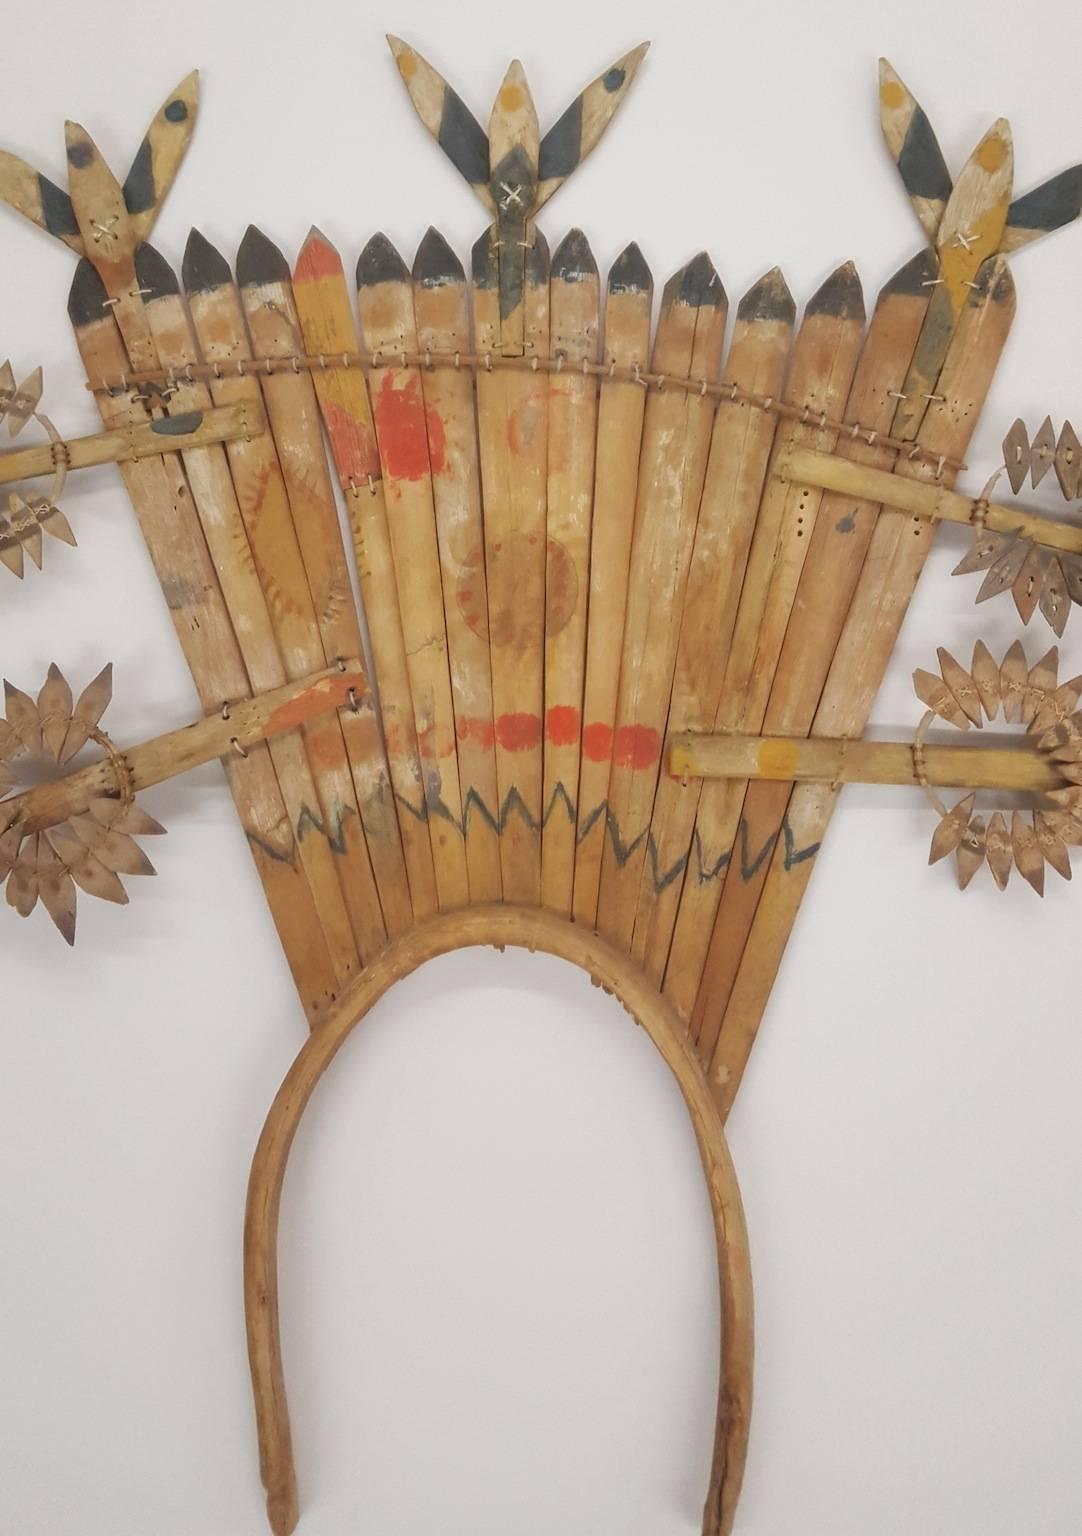 A Native American Apache mountain spirit crown and dance wands of pine wood slats, paint and cotton string. Handmade and painted circa 1930 head dress and wands used in mountain spirit dance ceremonies. Two dance wands (to be carried in each hand)